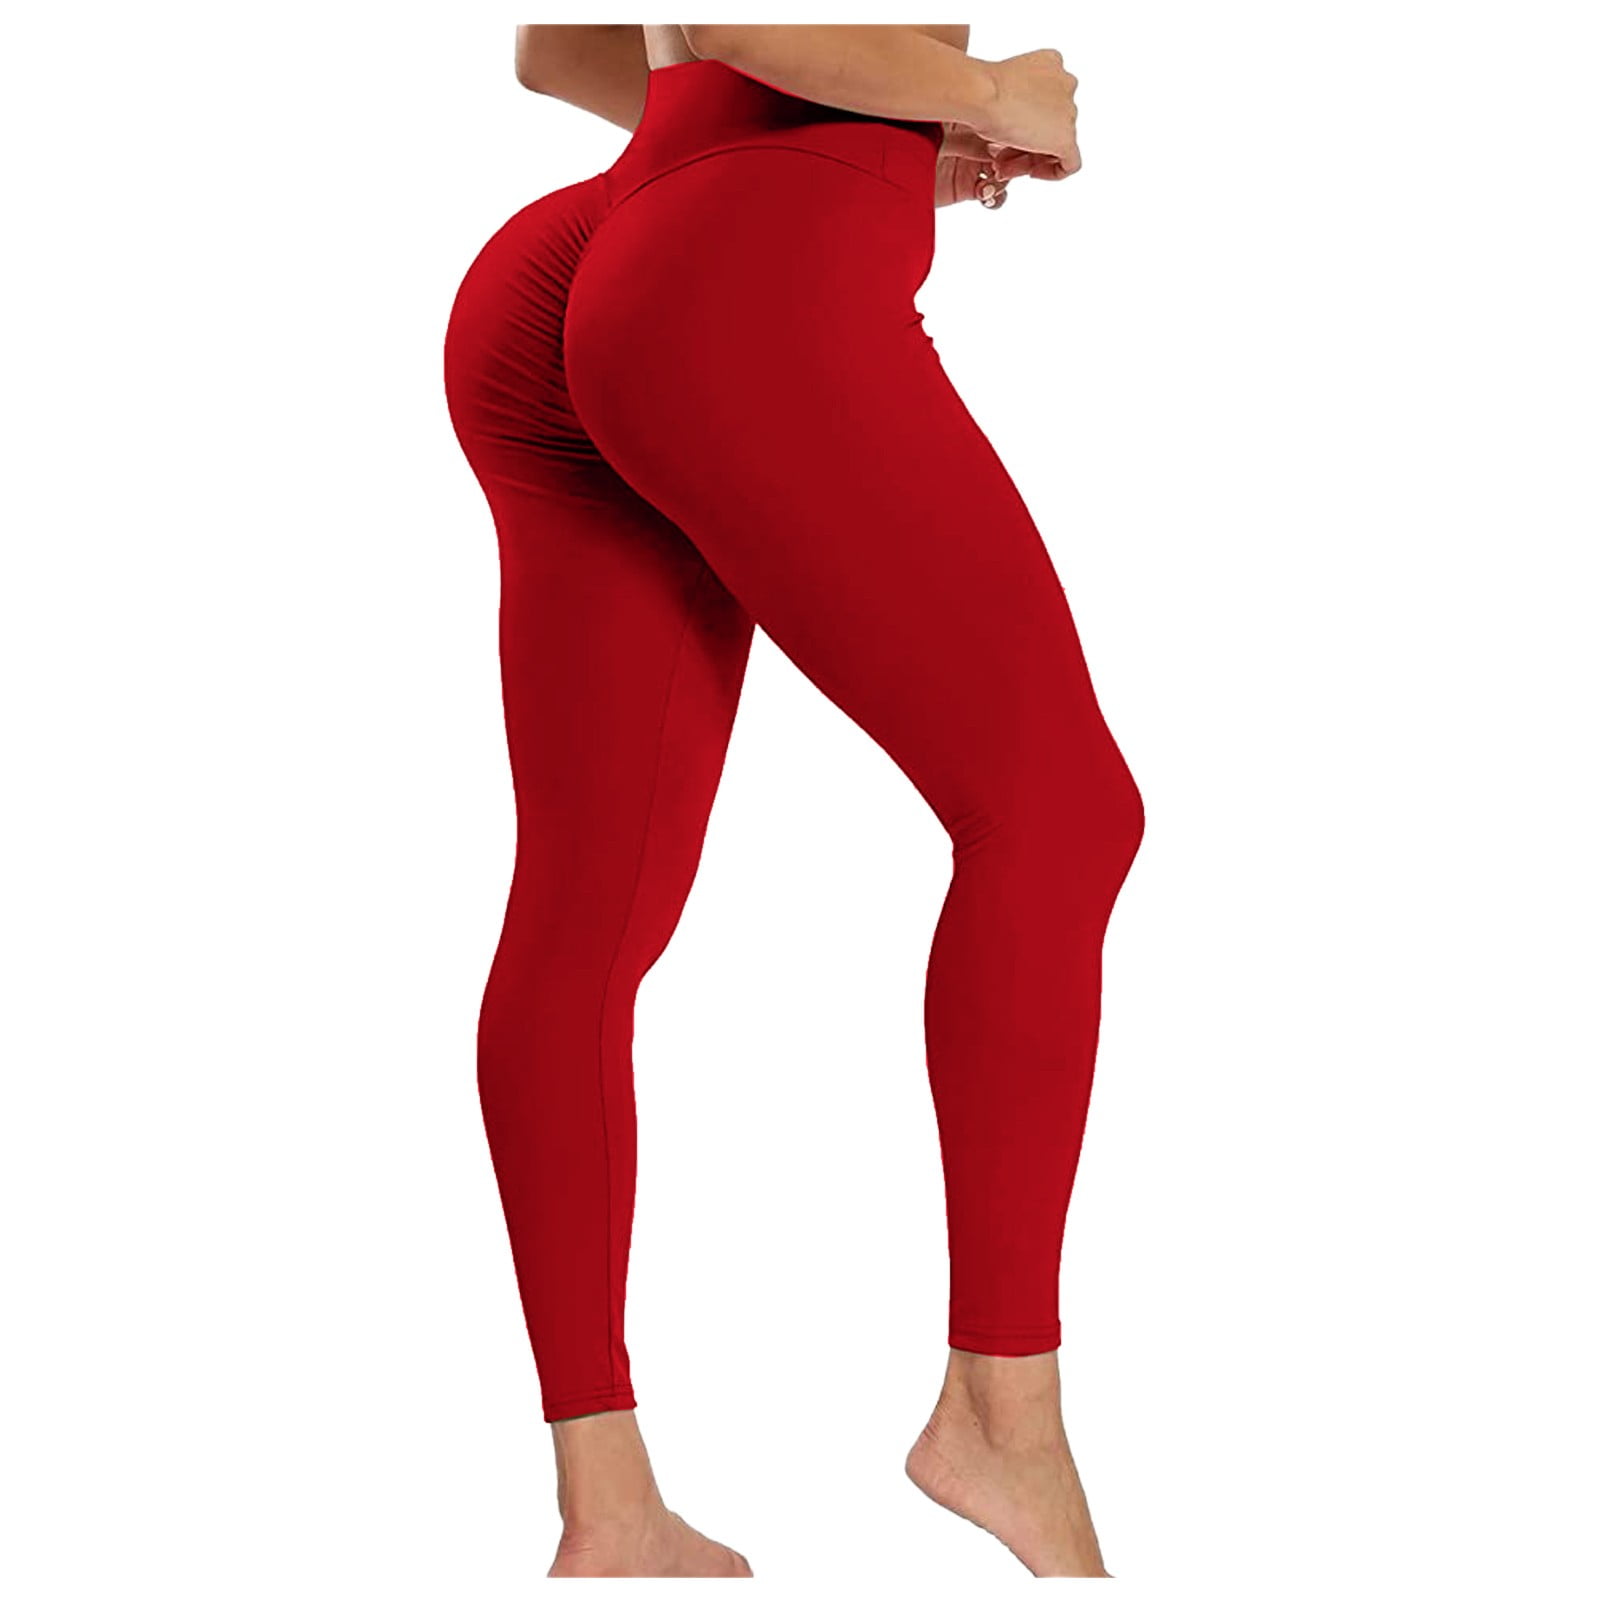  Yoga Pants Gradient Color Leggings For Women Gym High Elastic  Athletic Leggings Fitness Pants For Women Gym (Color : Red, Size : Large) :  Clothing, Shoes & Jewelry